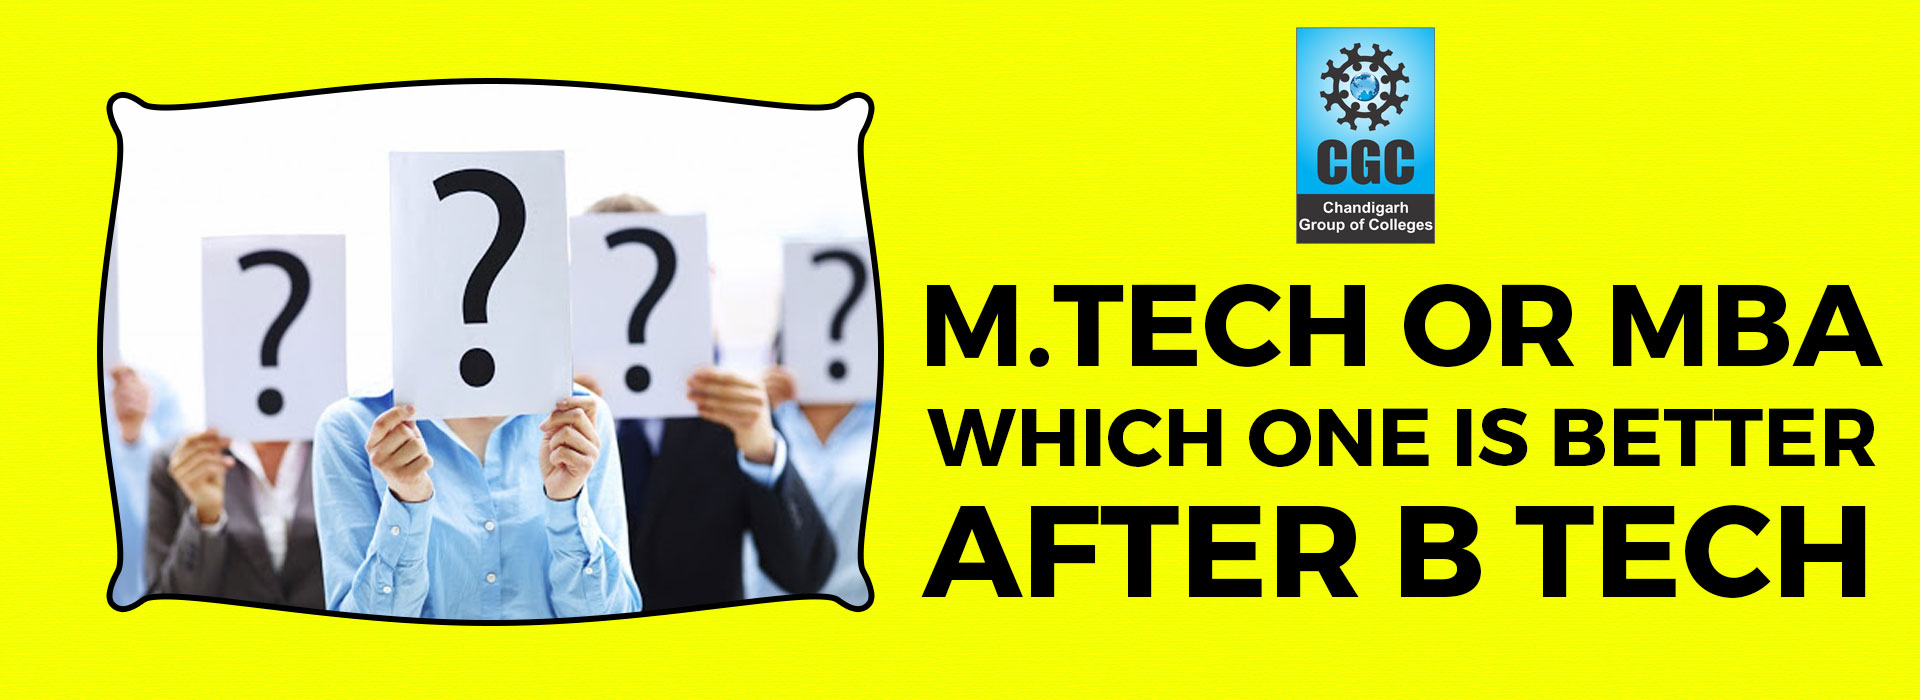 M.Tech or MBA: Which one is Better after B Tech 